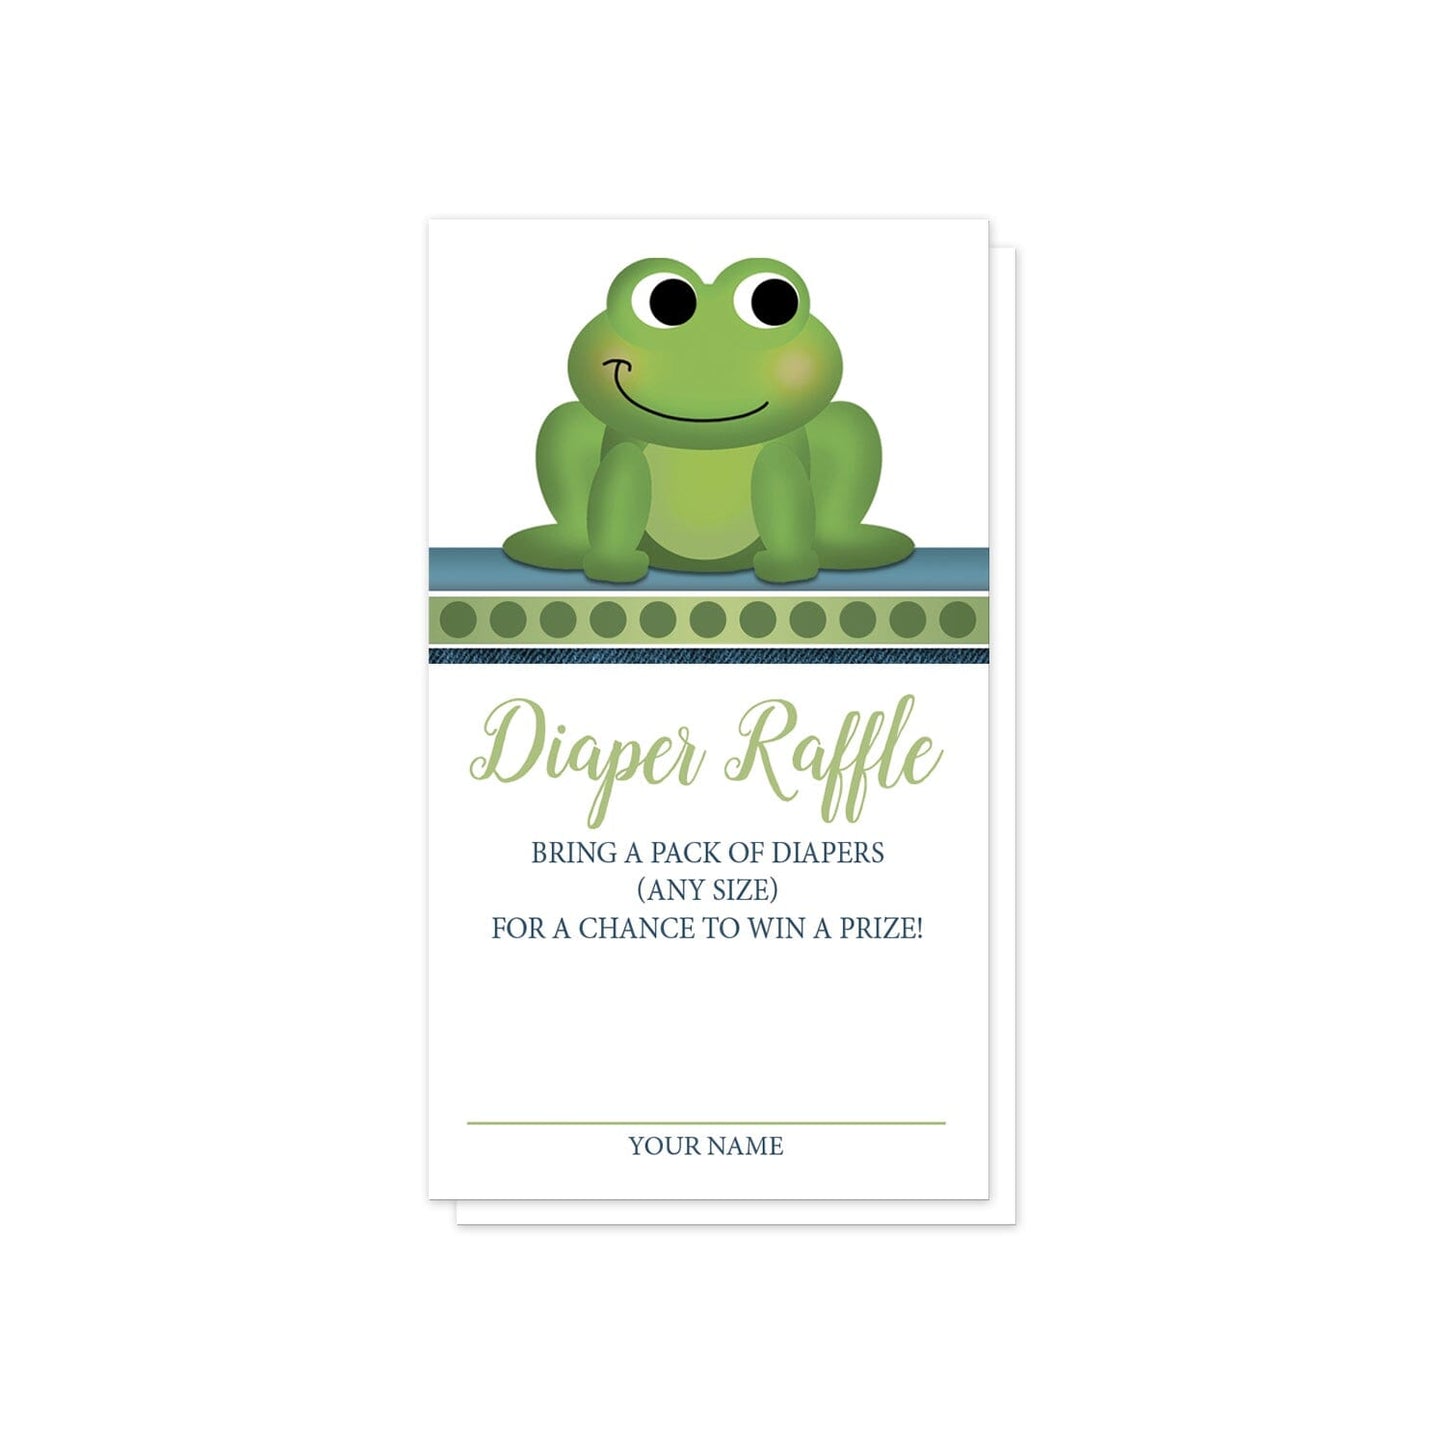 Cute Frog Green Rustic Blue Diaper Raffle Cards at Artistically Invited. Cute frog green rustic blue diaper raffle cards with a happy and adorable green frog on a blue, green polka dot, and thin blue denim stripe at the top of the cards. Your diaper raffle details are printed in green and blue on white below the cute frog. 